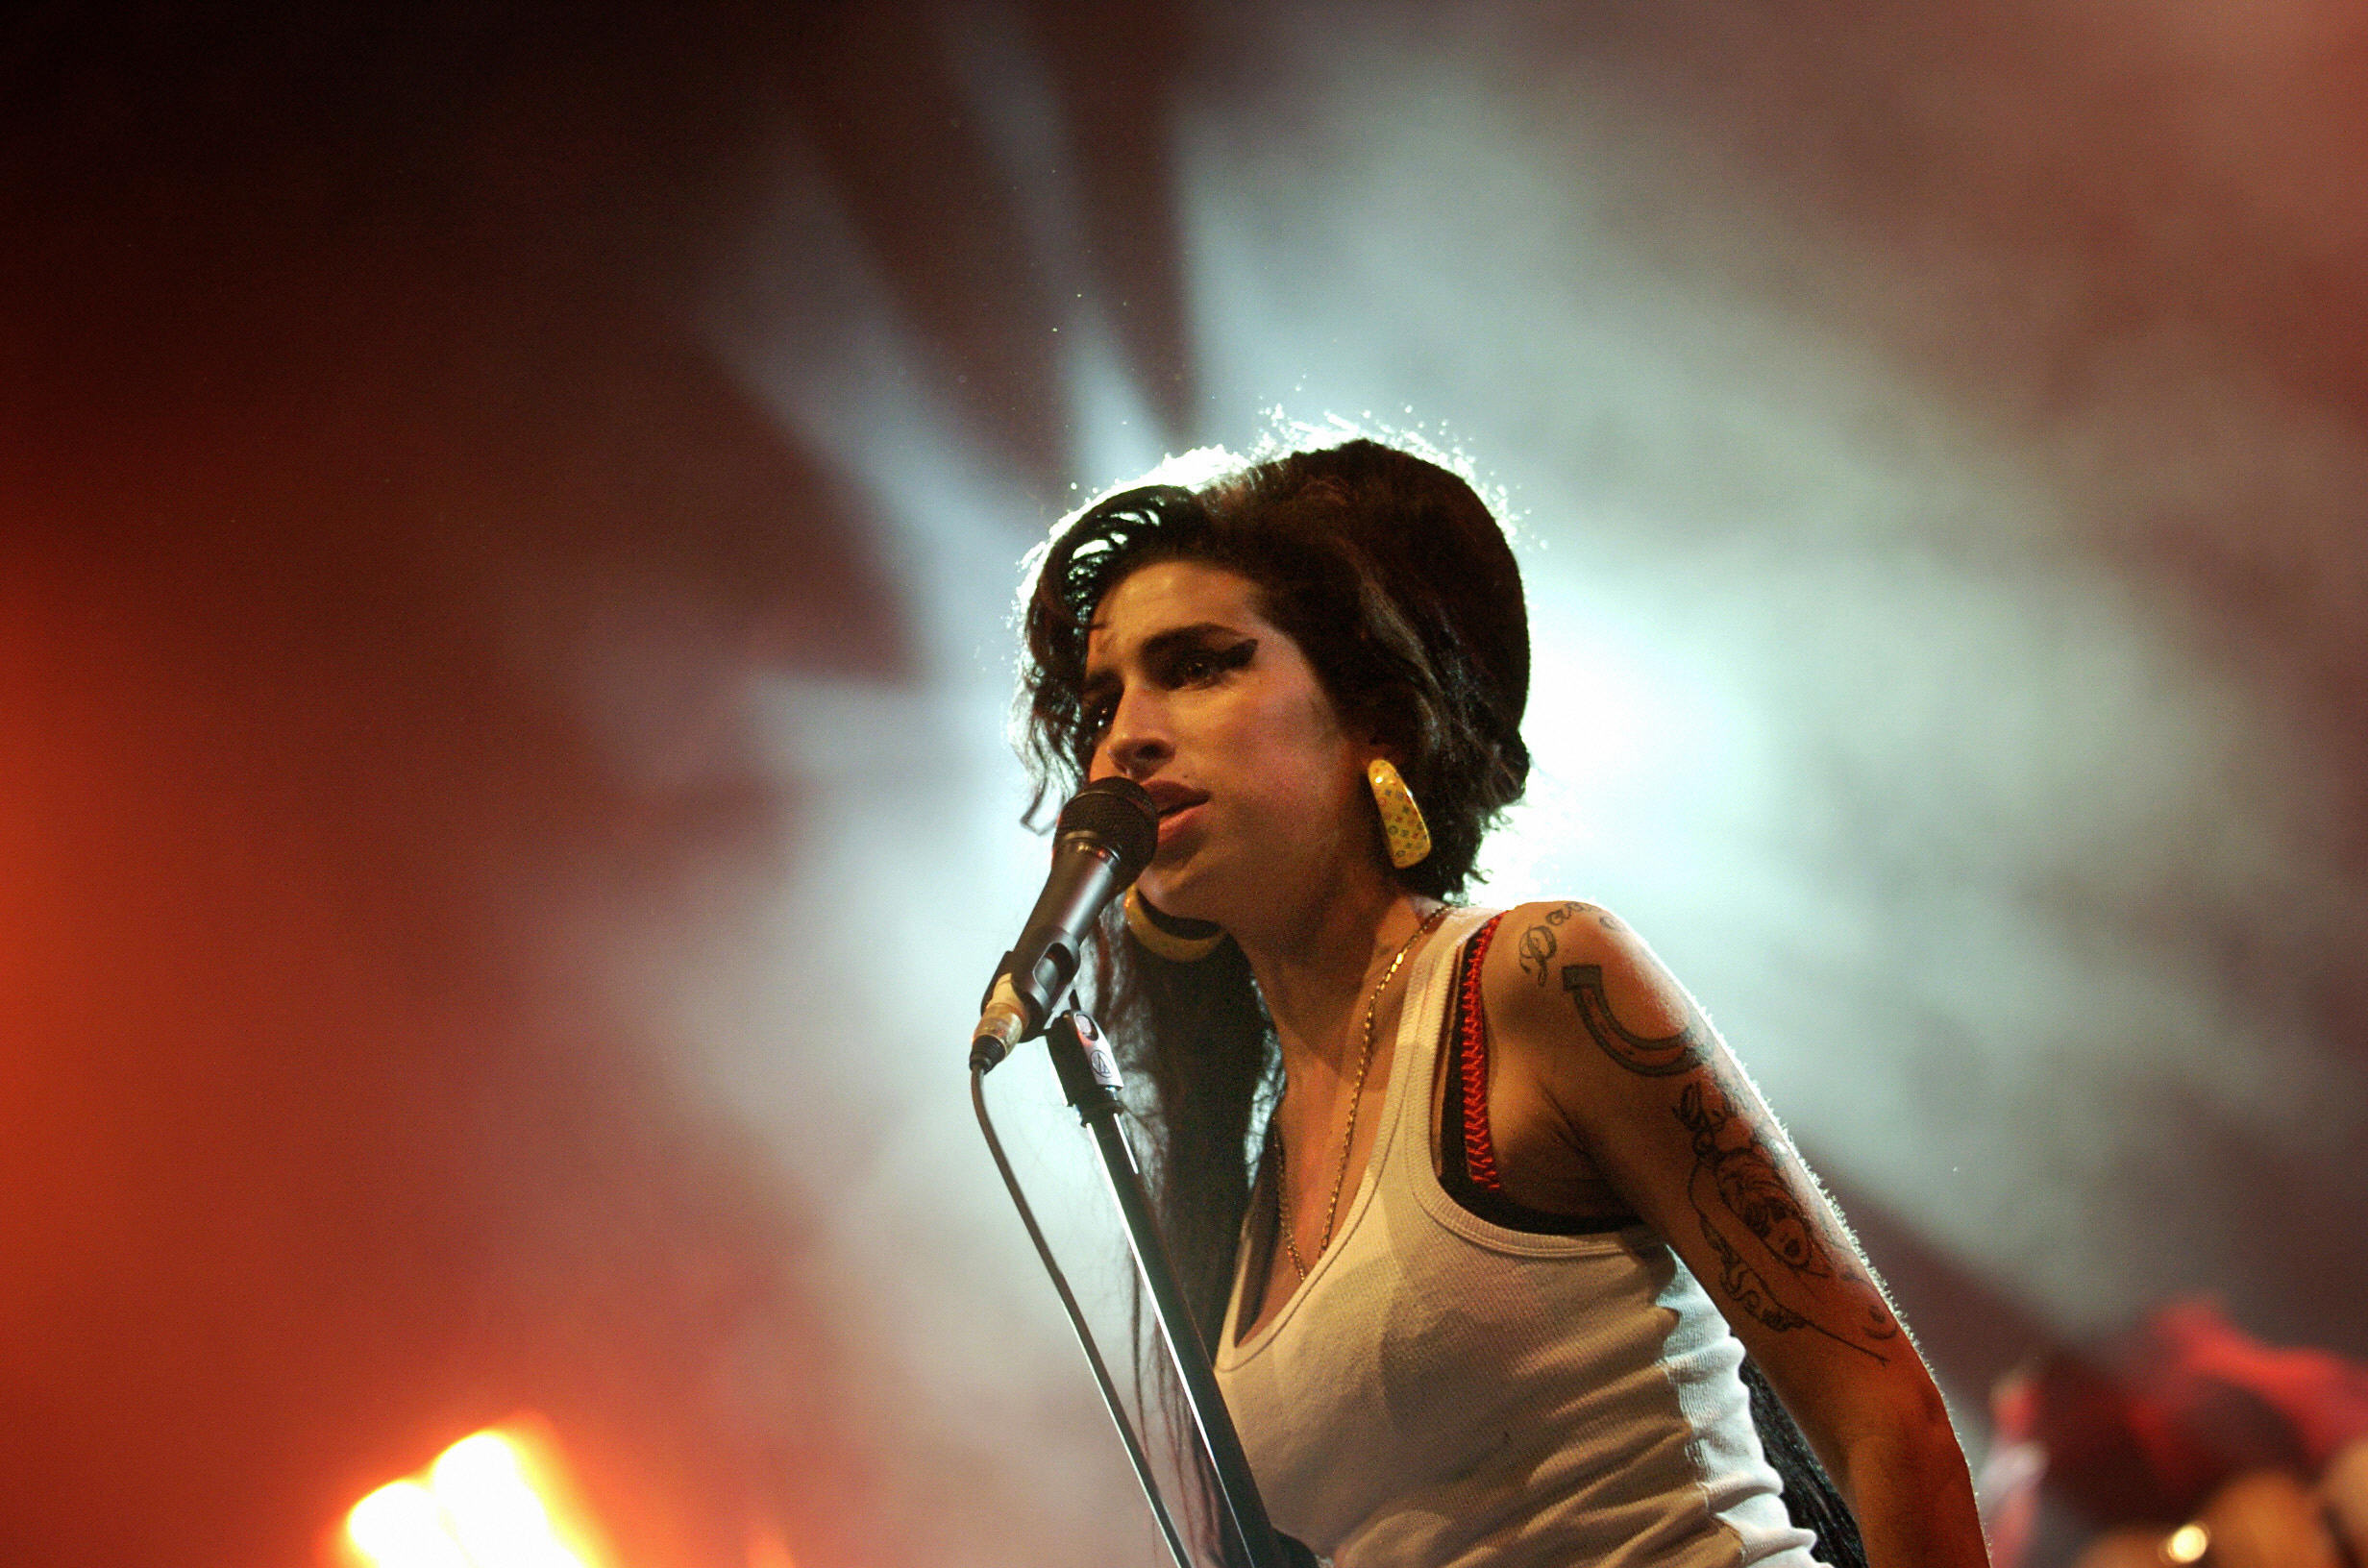 Amy Winehouse on stage in June 2007 during the Eurockeennes music festival in Belfort, France